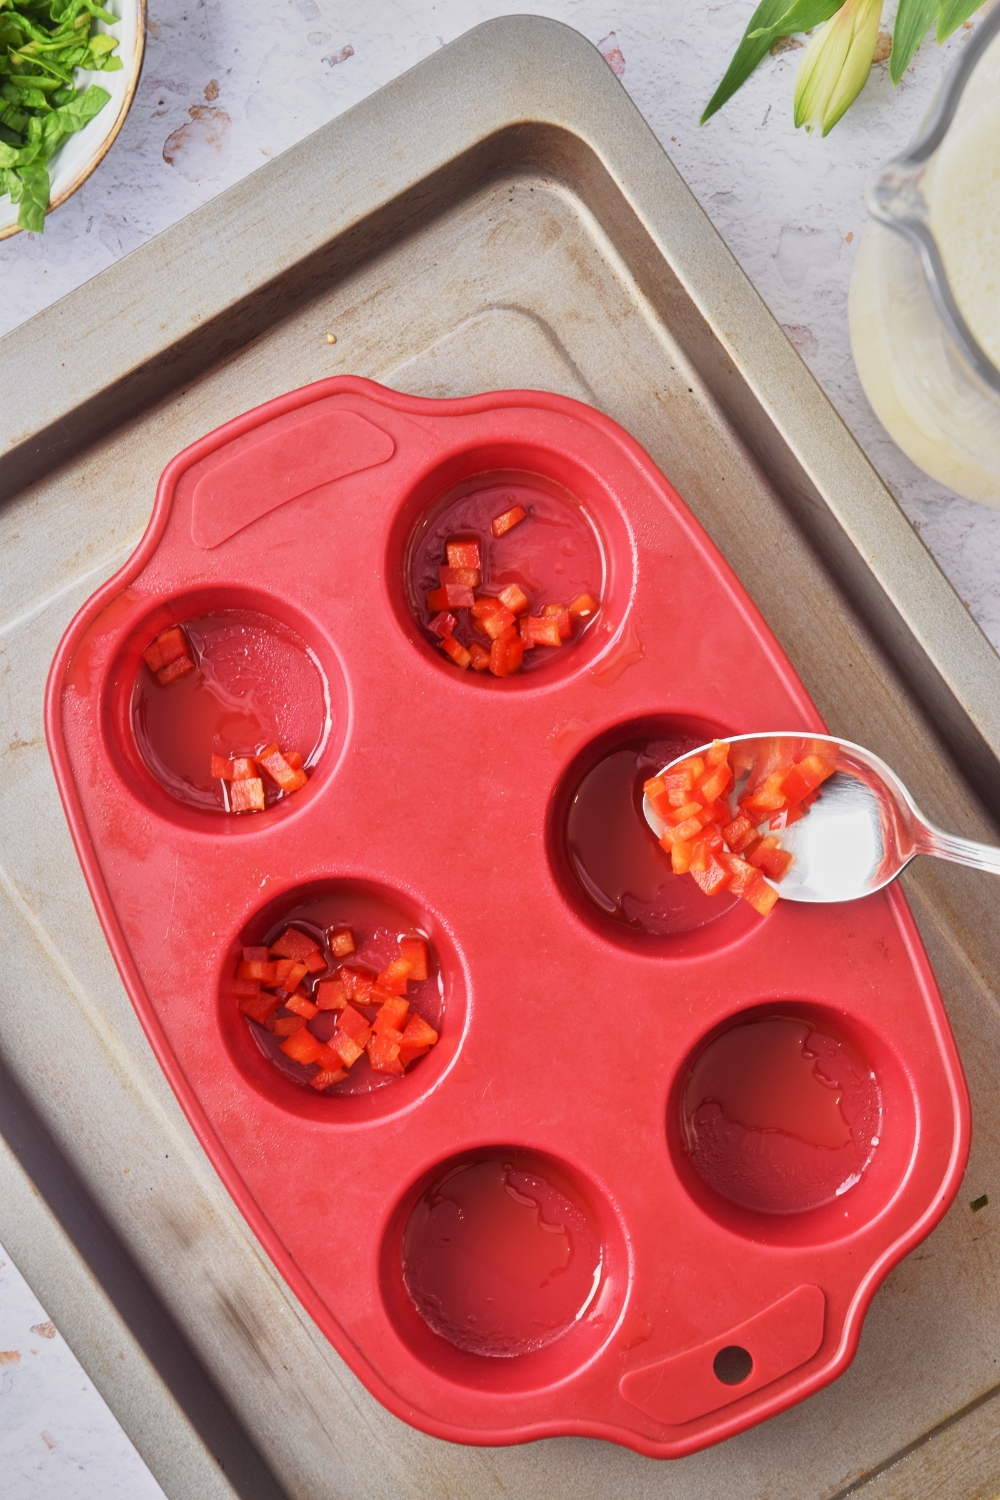 A baking sheet with a silicone muffin mold. A spoon is adding diced red peppers into each mold.